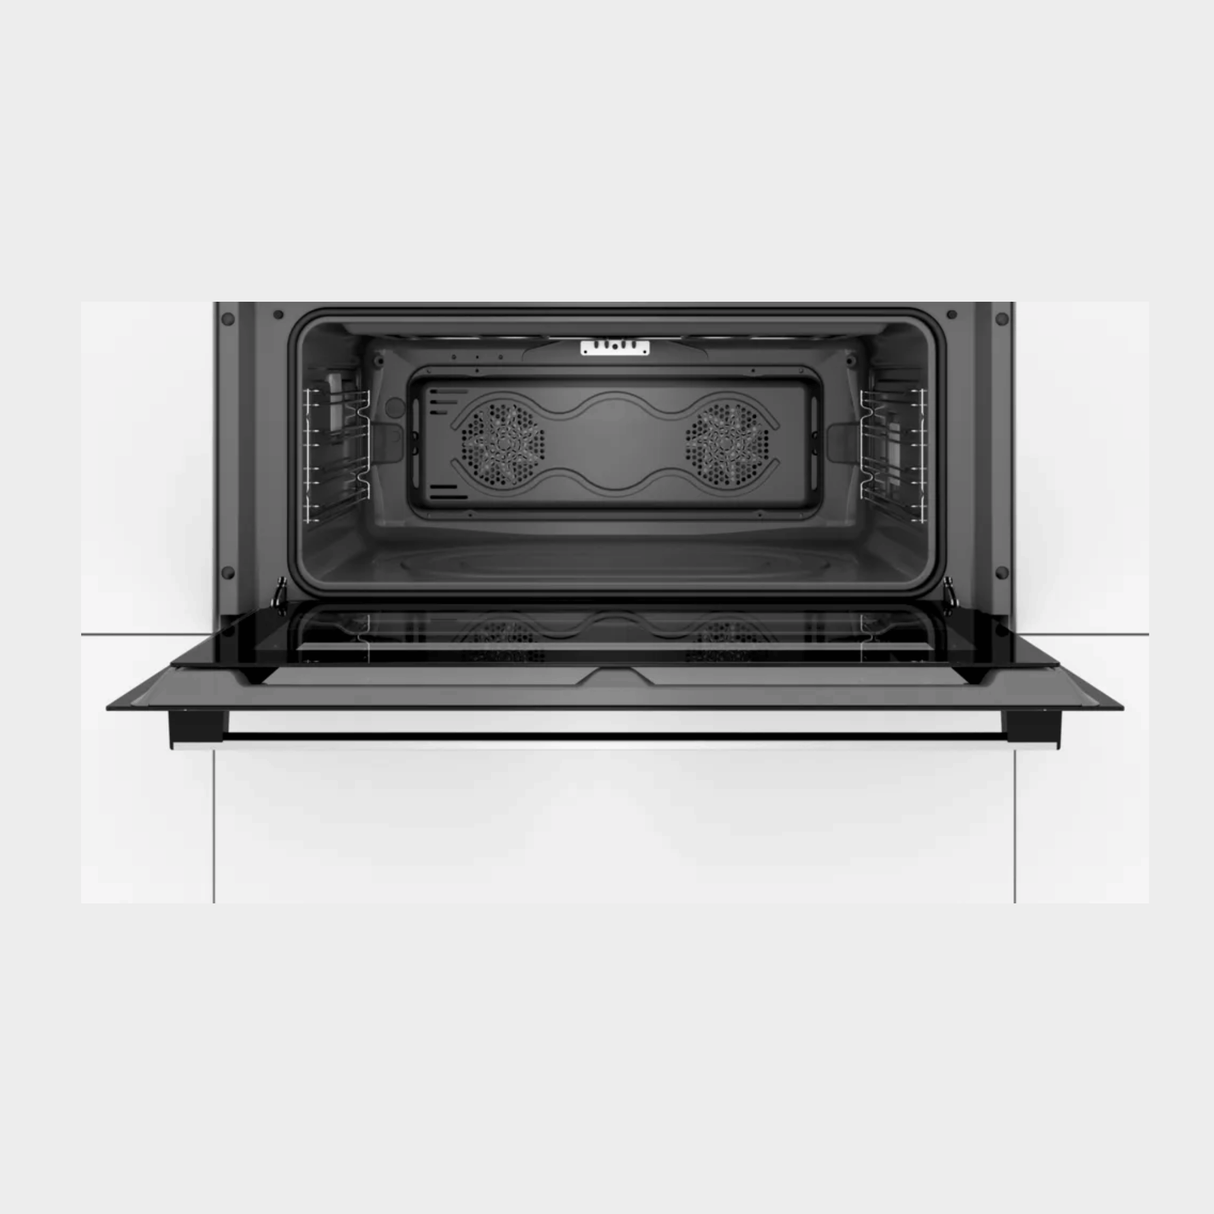 Bosch Built-in Electric Oven, 6 Function, 60x60cm HBF113BS0B – Stainless Steel